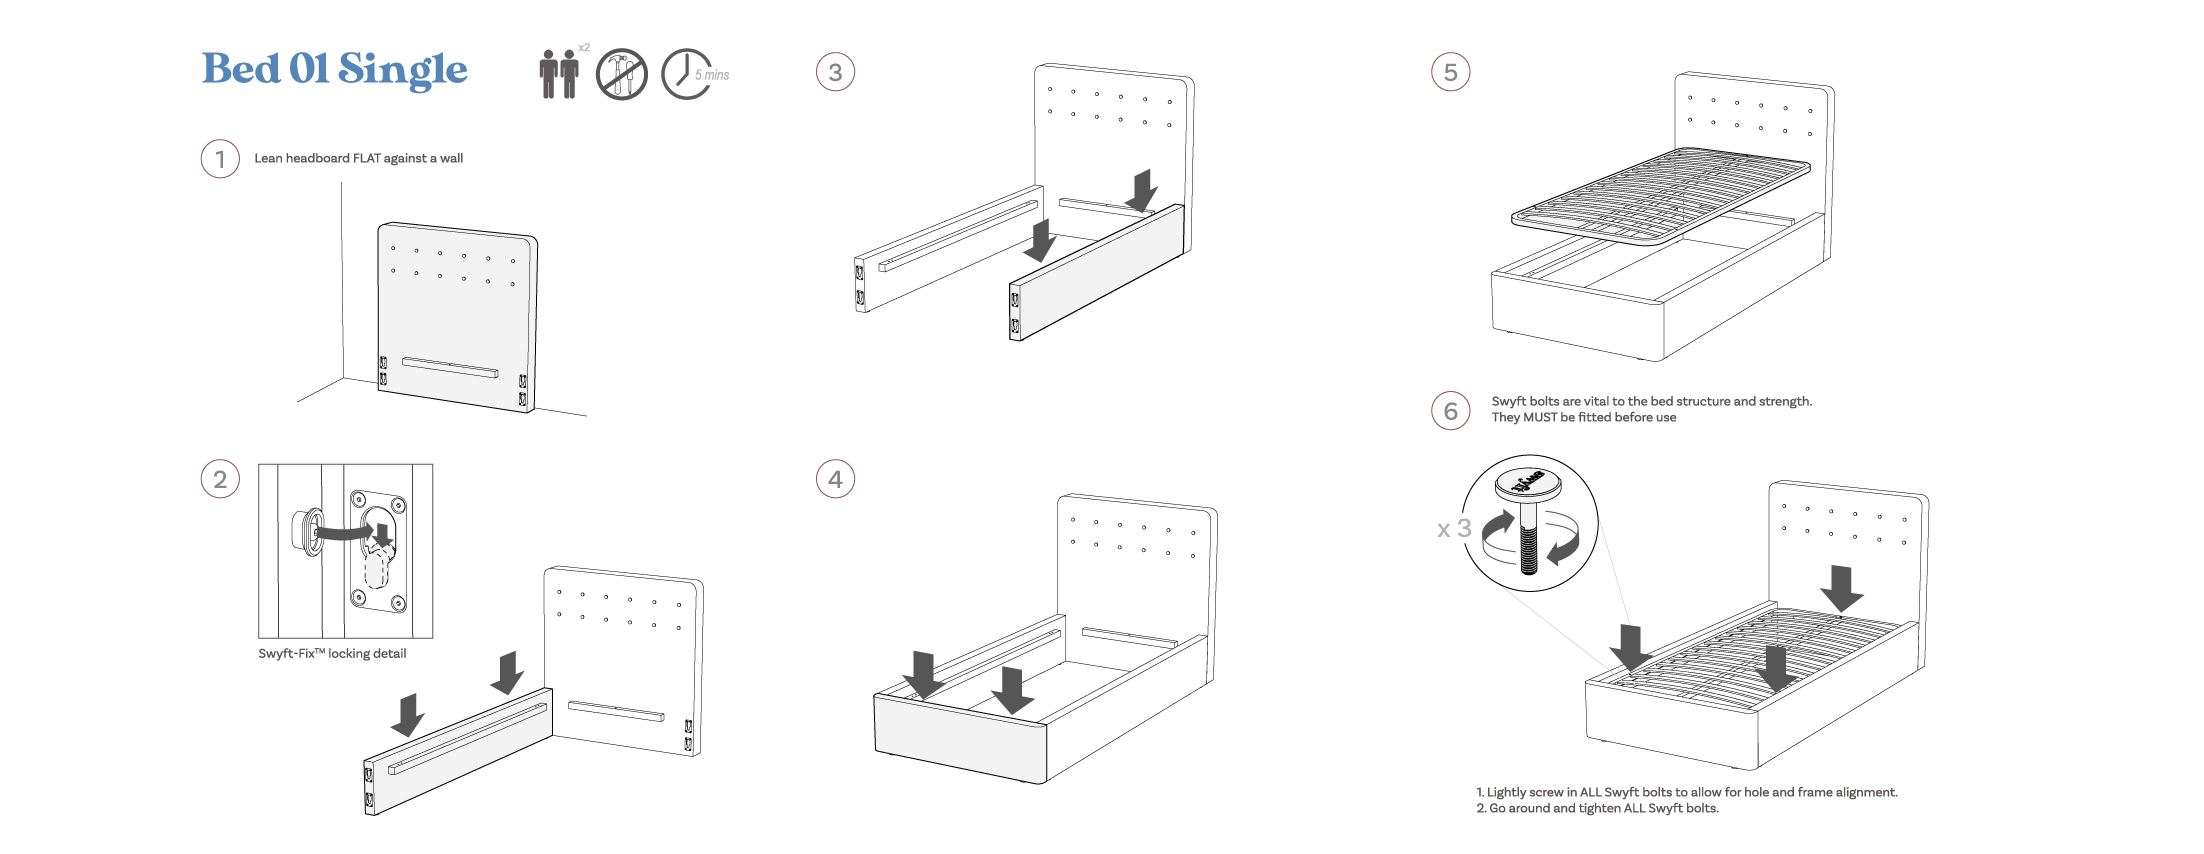 Bed dimensions